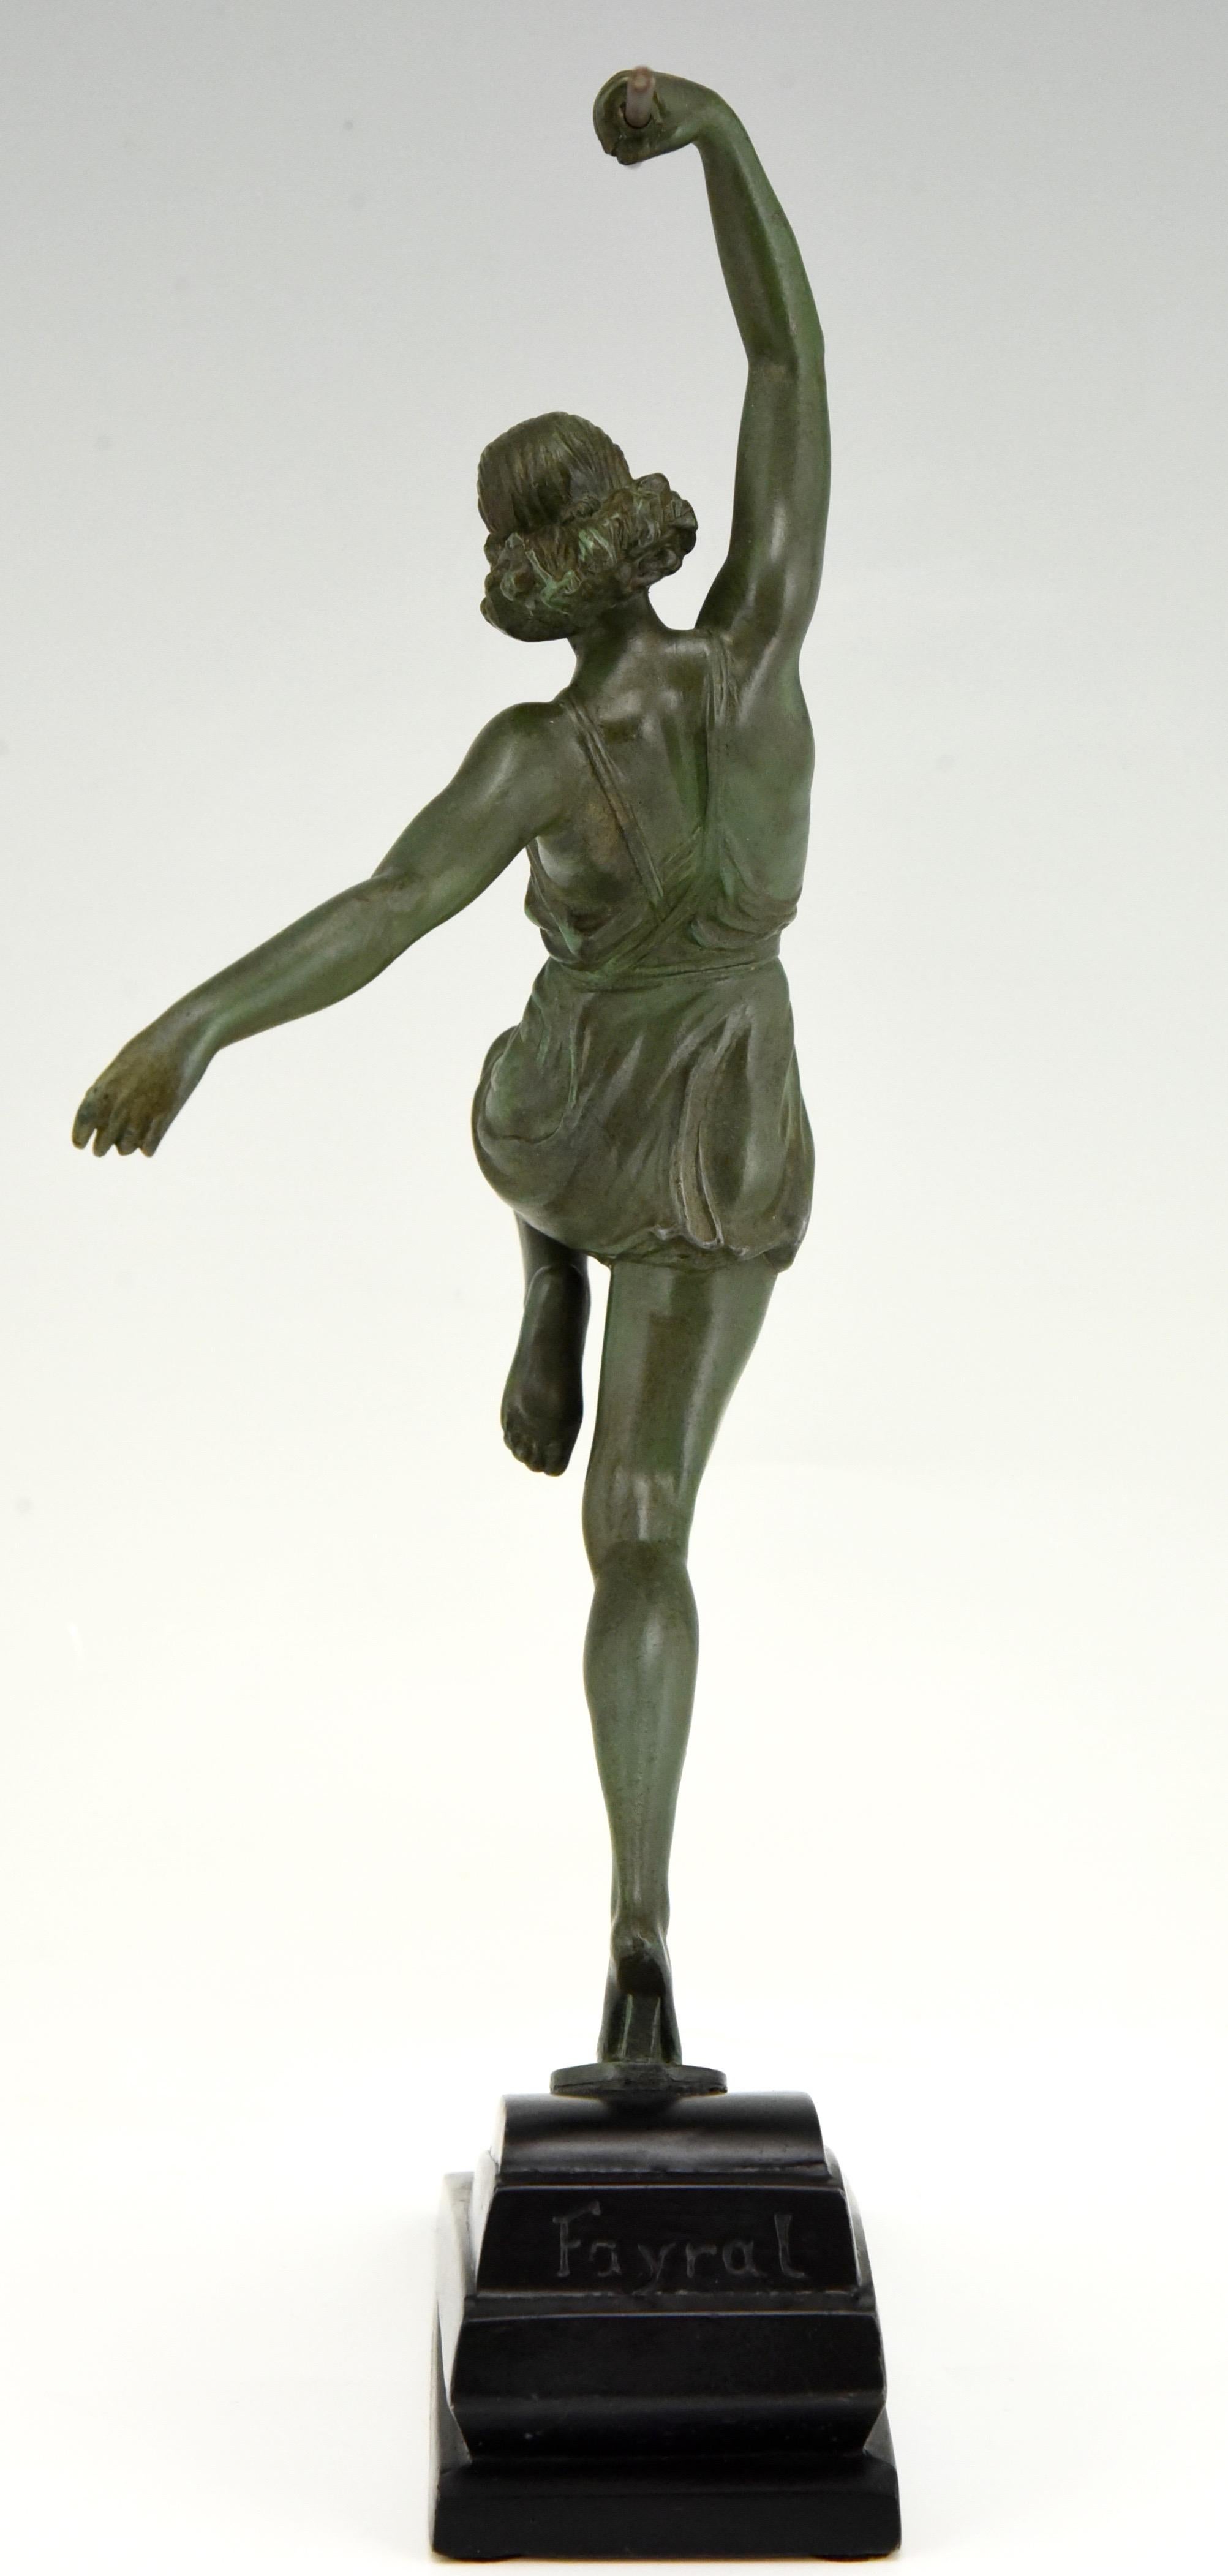 Art Deco Sculpture Javelin Thrower Fayral, Pierre Le Faguays for Le Verrier 1930 1